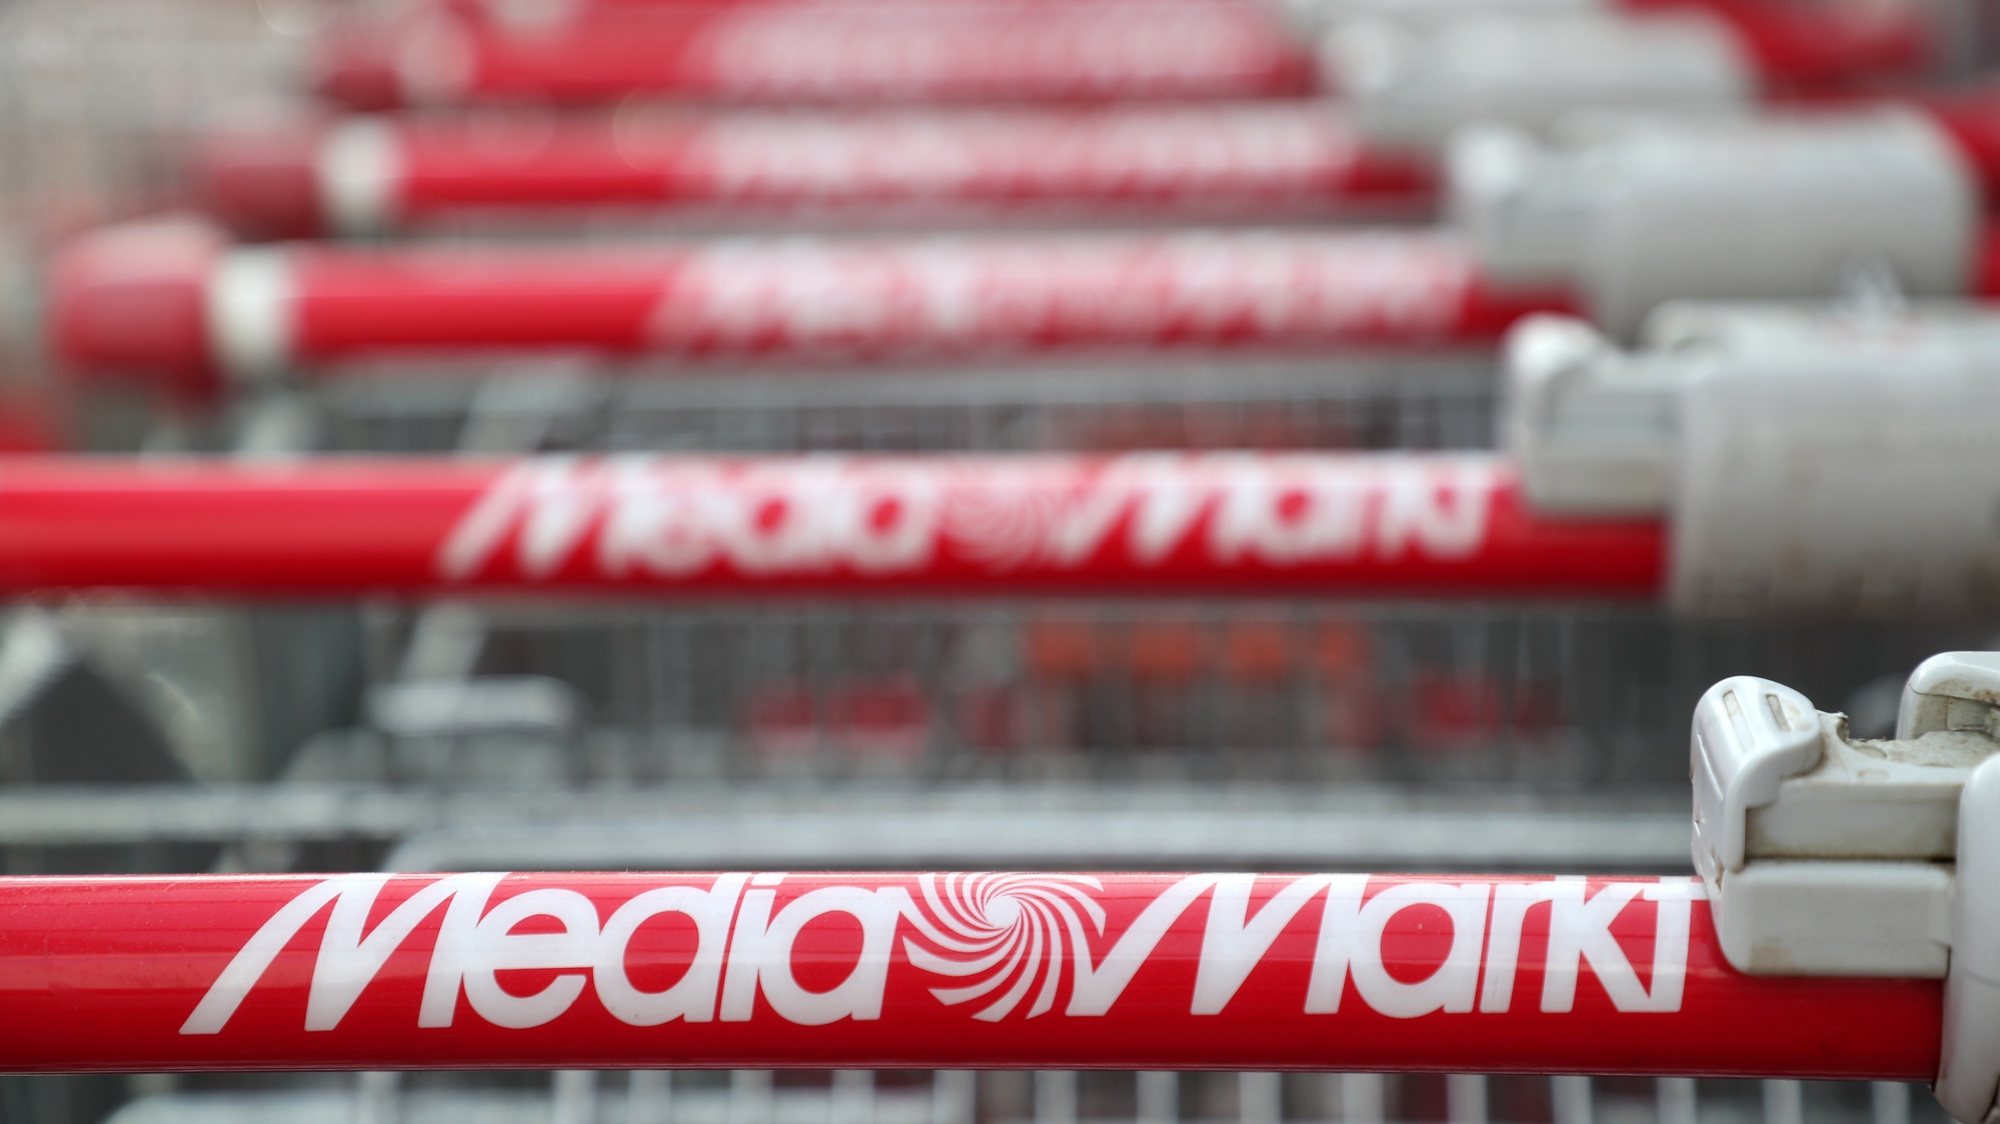 epa07366552 Mediamarkt logo on a shopping trolley at a Mediamarkt during the company&#039;s general assembly meeting in Duesseldorf, Germany, 13 February 2019. Ceconomy AG is a listed German trading company and operates the consumer electronics chains Mediamarkt and Saturn.  After a crisis year, the electronics trading holding Ceconomy prepares its shareholders for hard cuts, the share had lost two thirds of its value last year.  EPA/FRIEDEMANN VOGEL